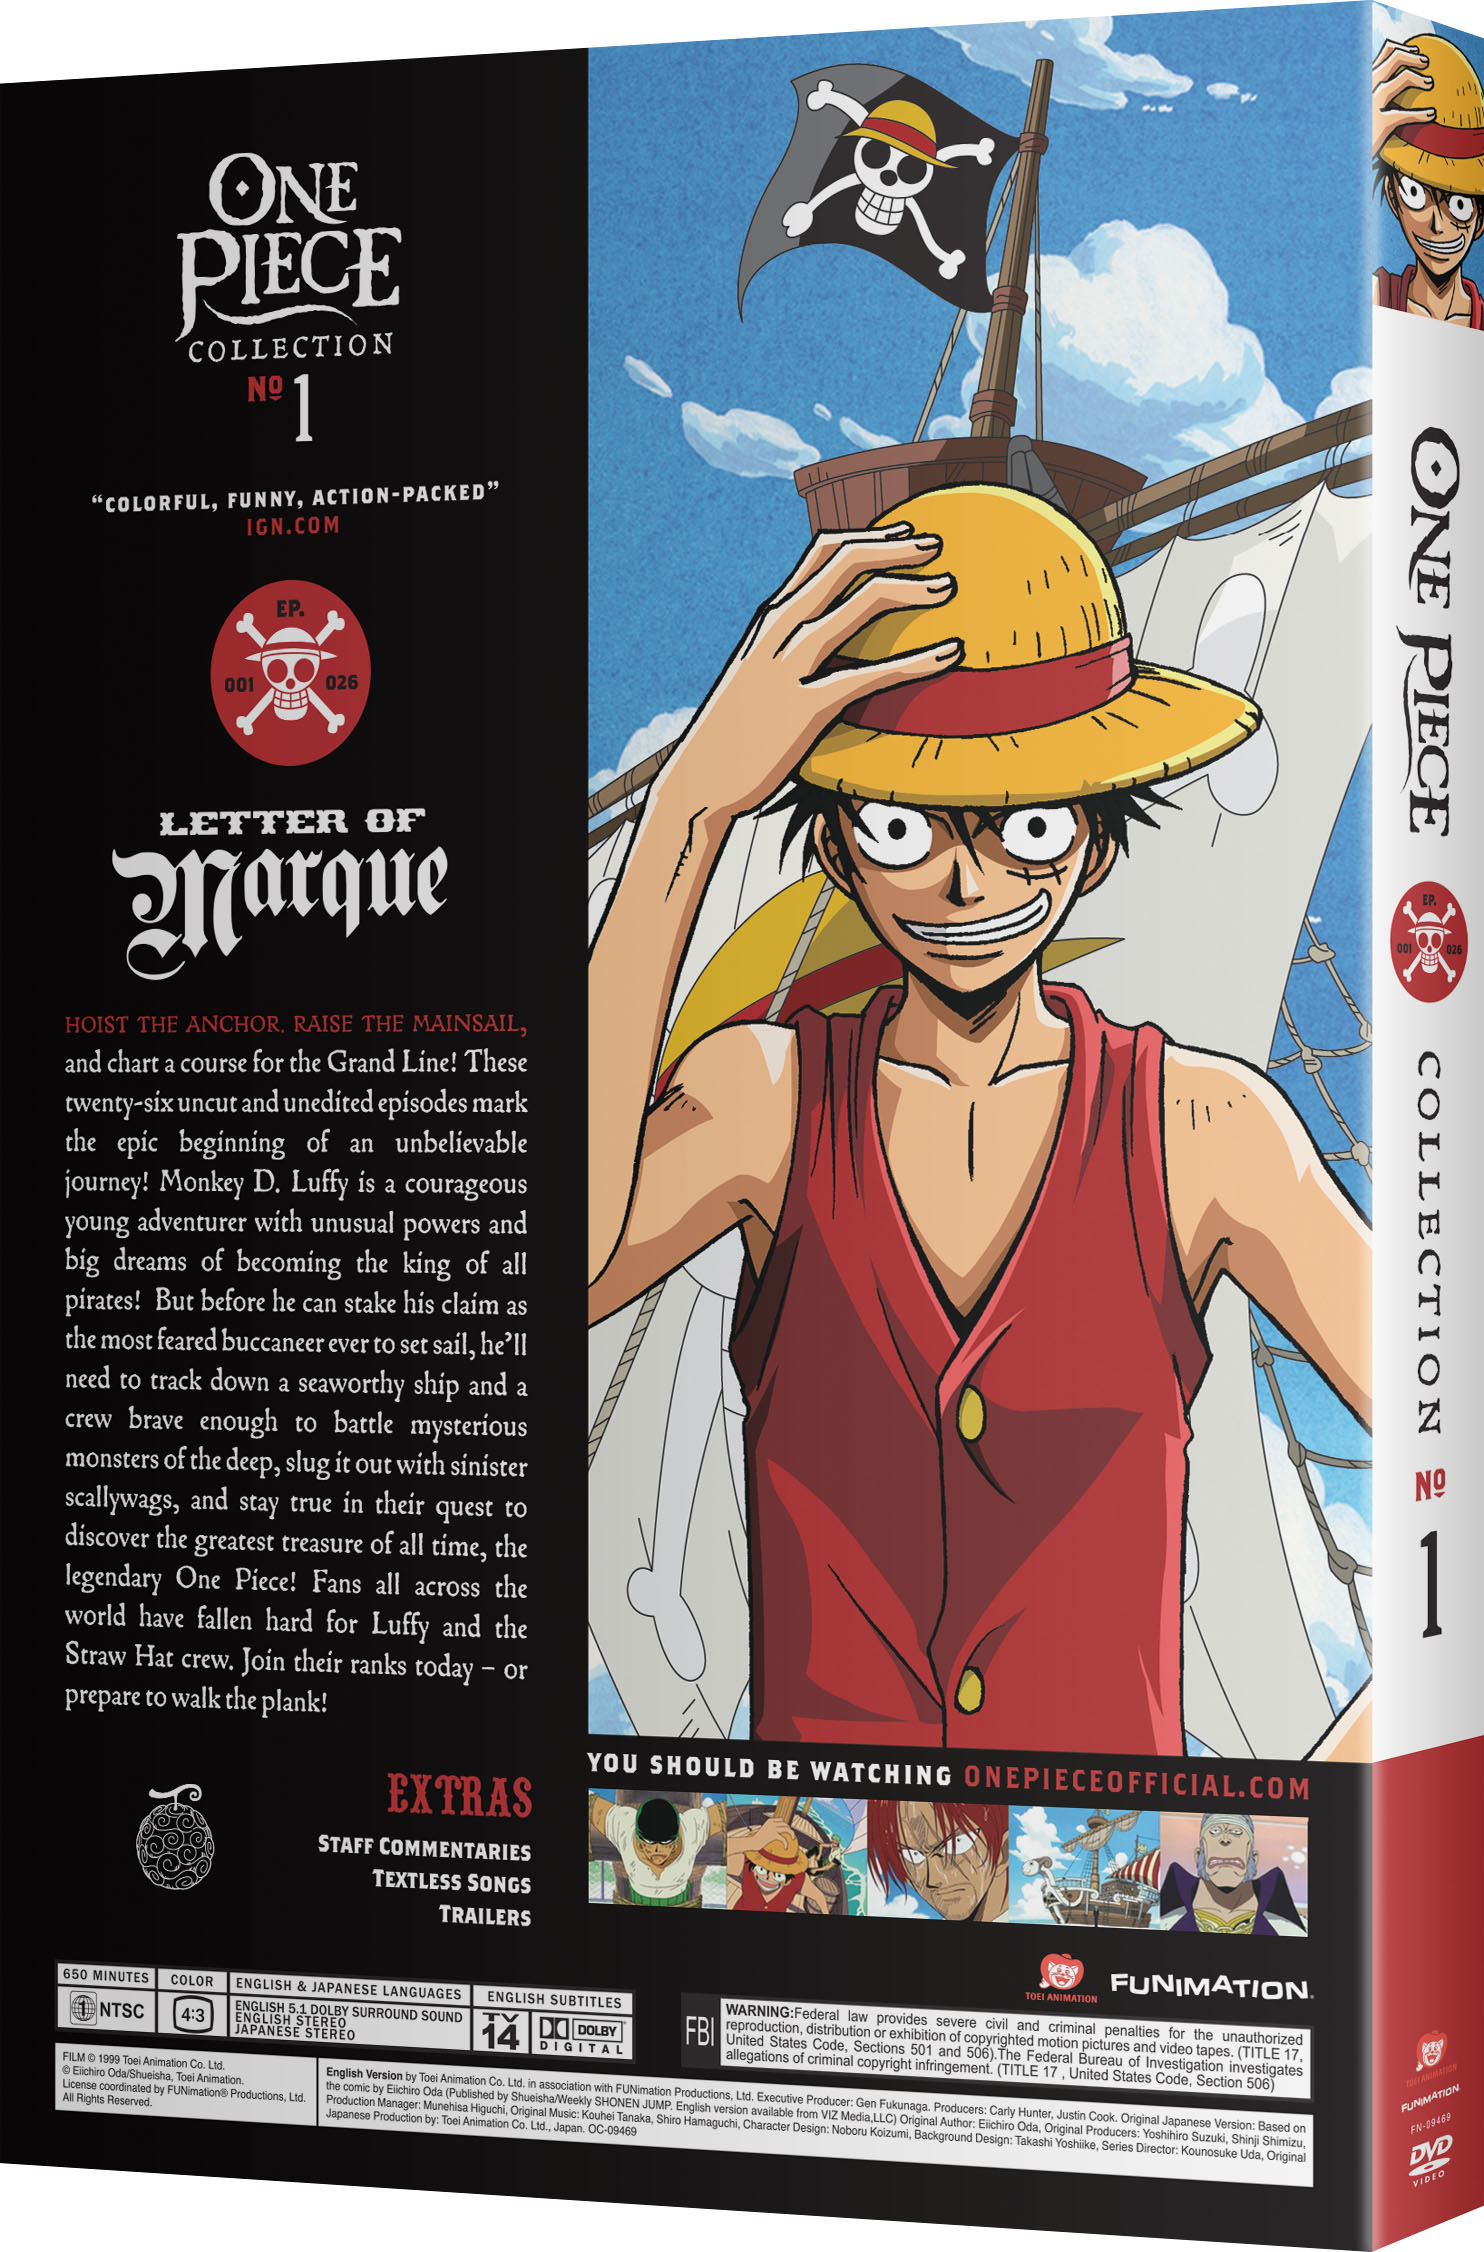 one-piece-collection-1-dvd image count 1